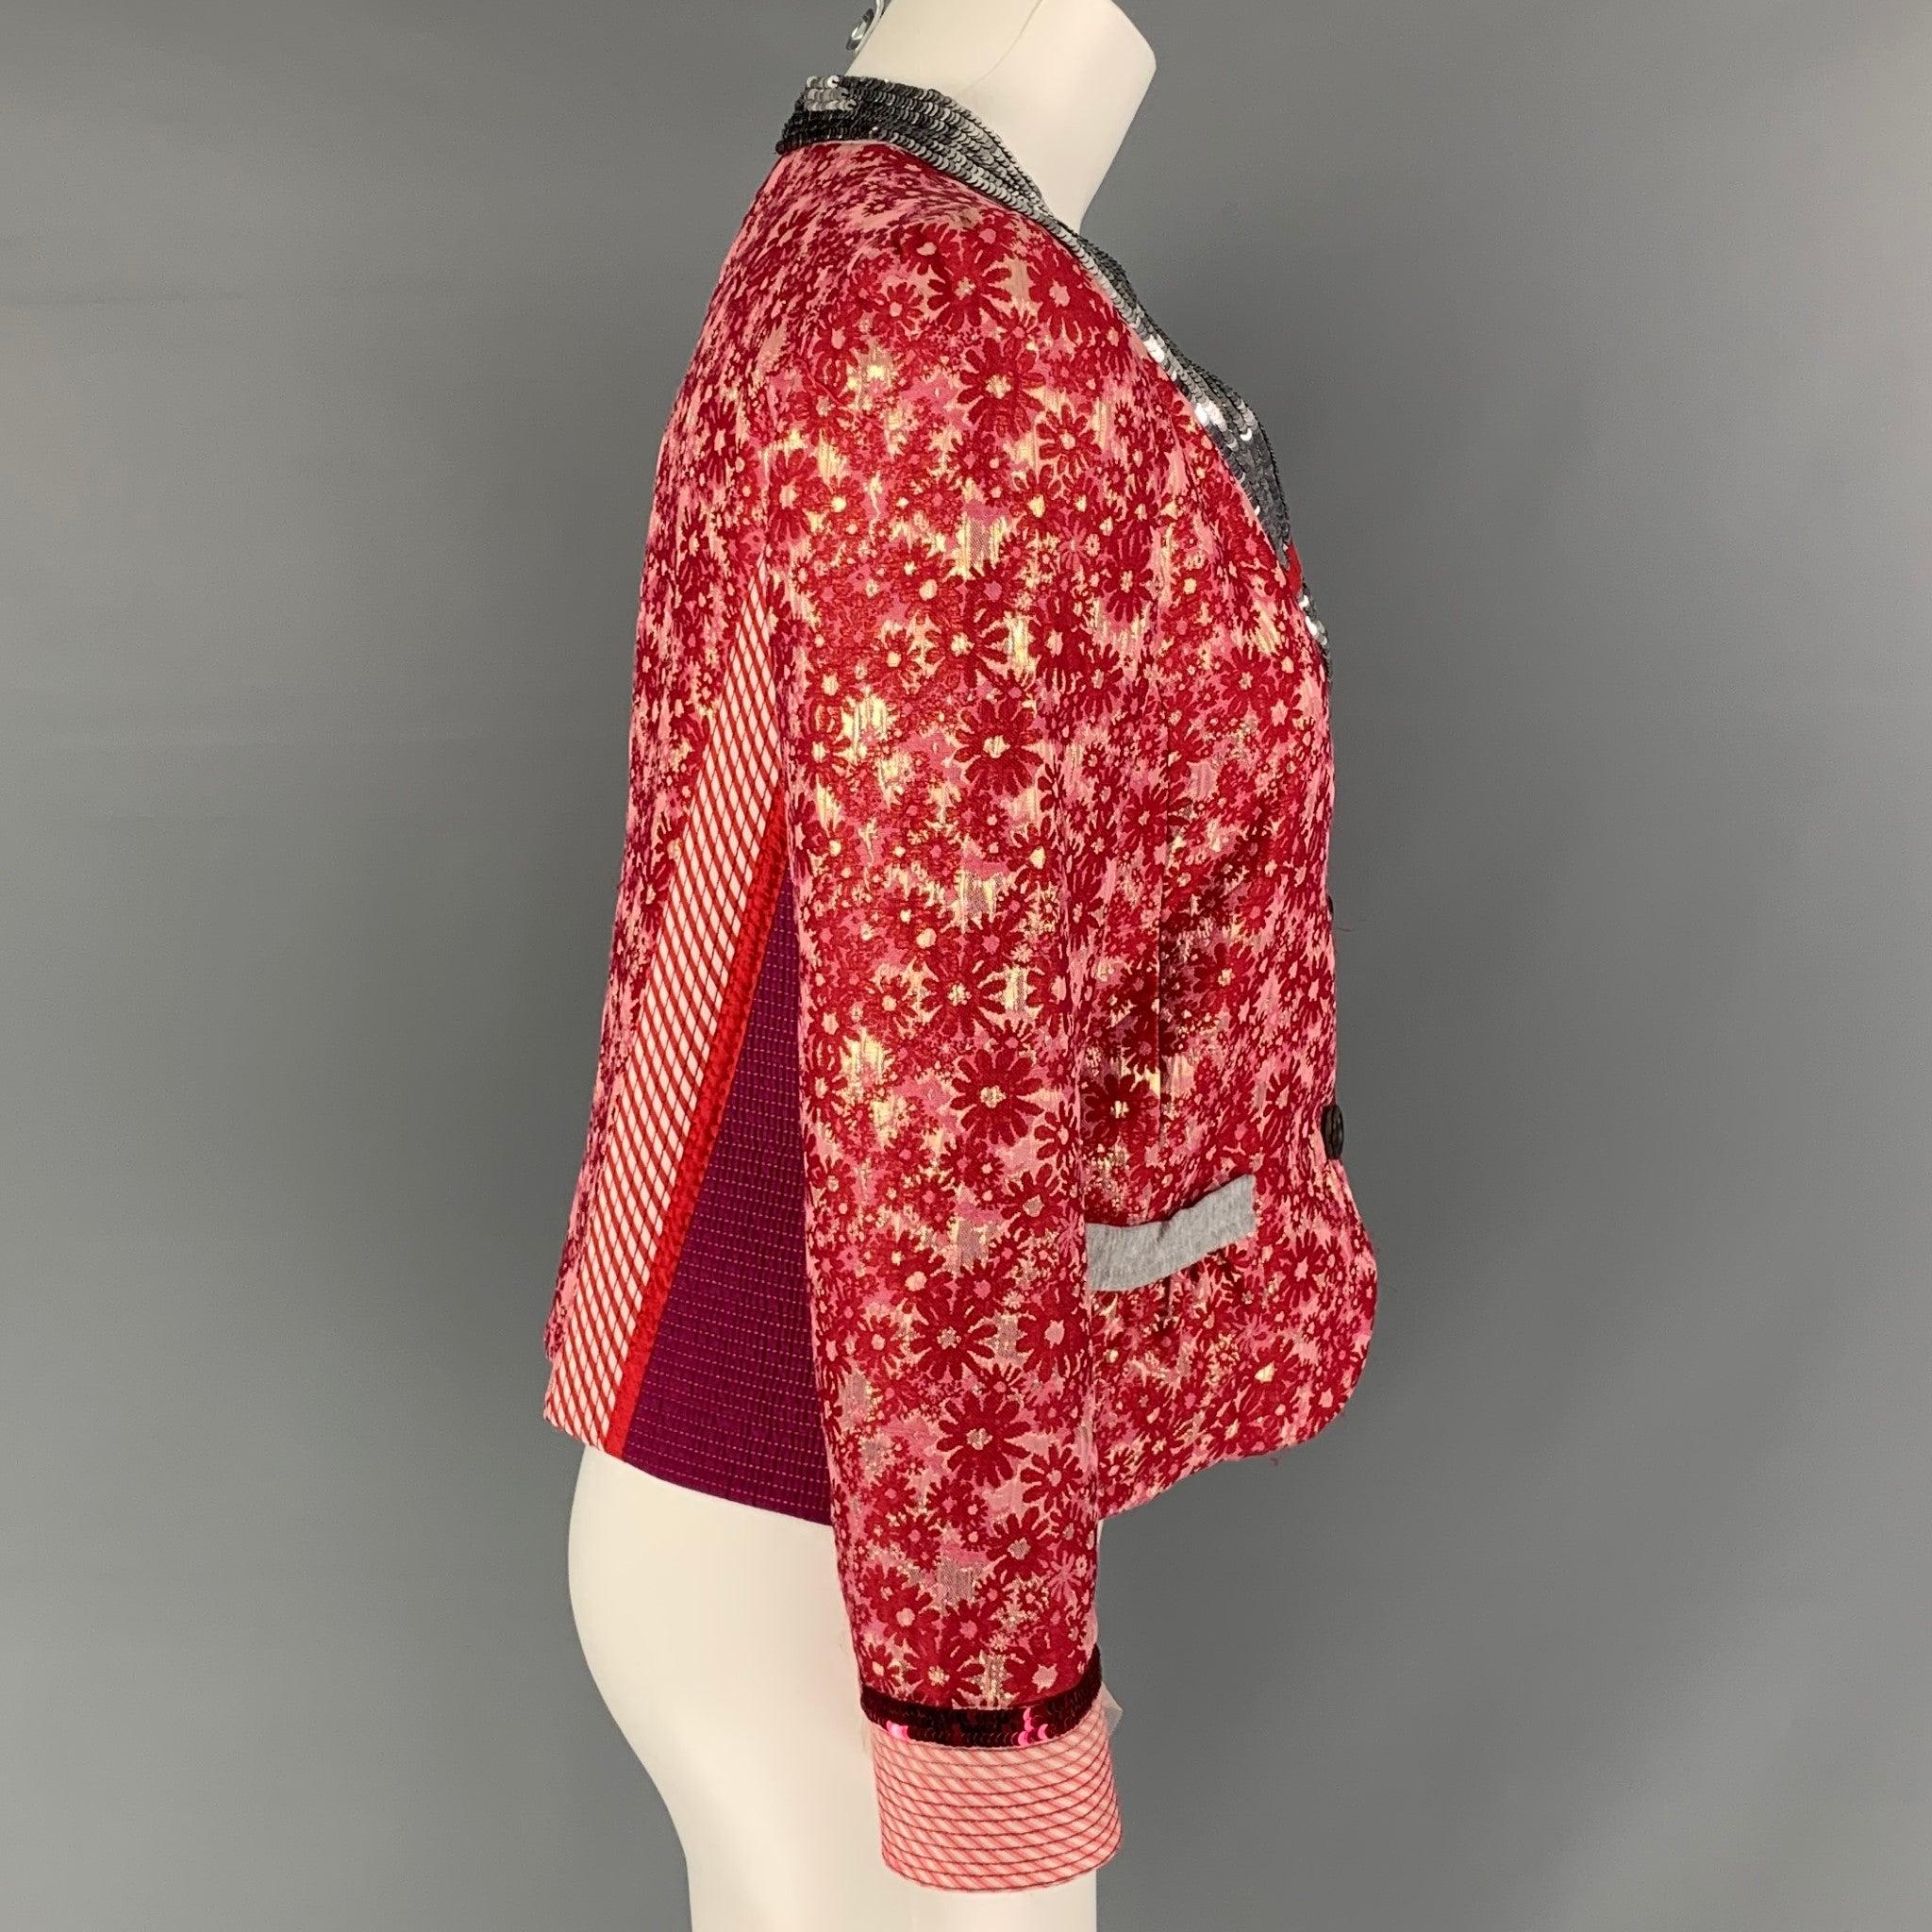 MARC JACOBS blazer comes in raspberry and silver floral acetate blend jacquard featuring sequins trim details, two frontal pockets, and contrast top stitches. Made in USA.Excellent Pre-Owned Condition.  

Marked:   6 

Measurements: 
 
Shoulder: 14